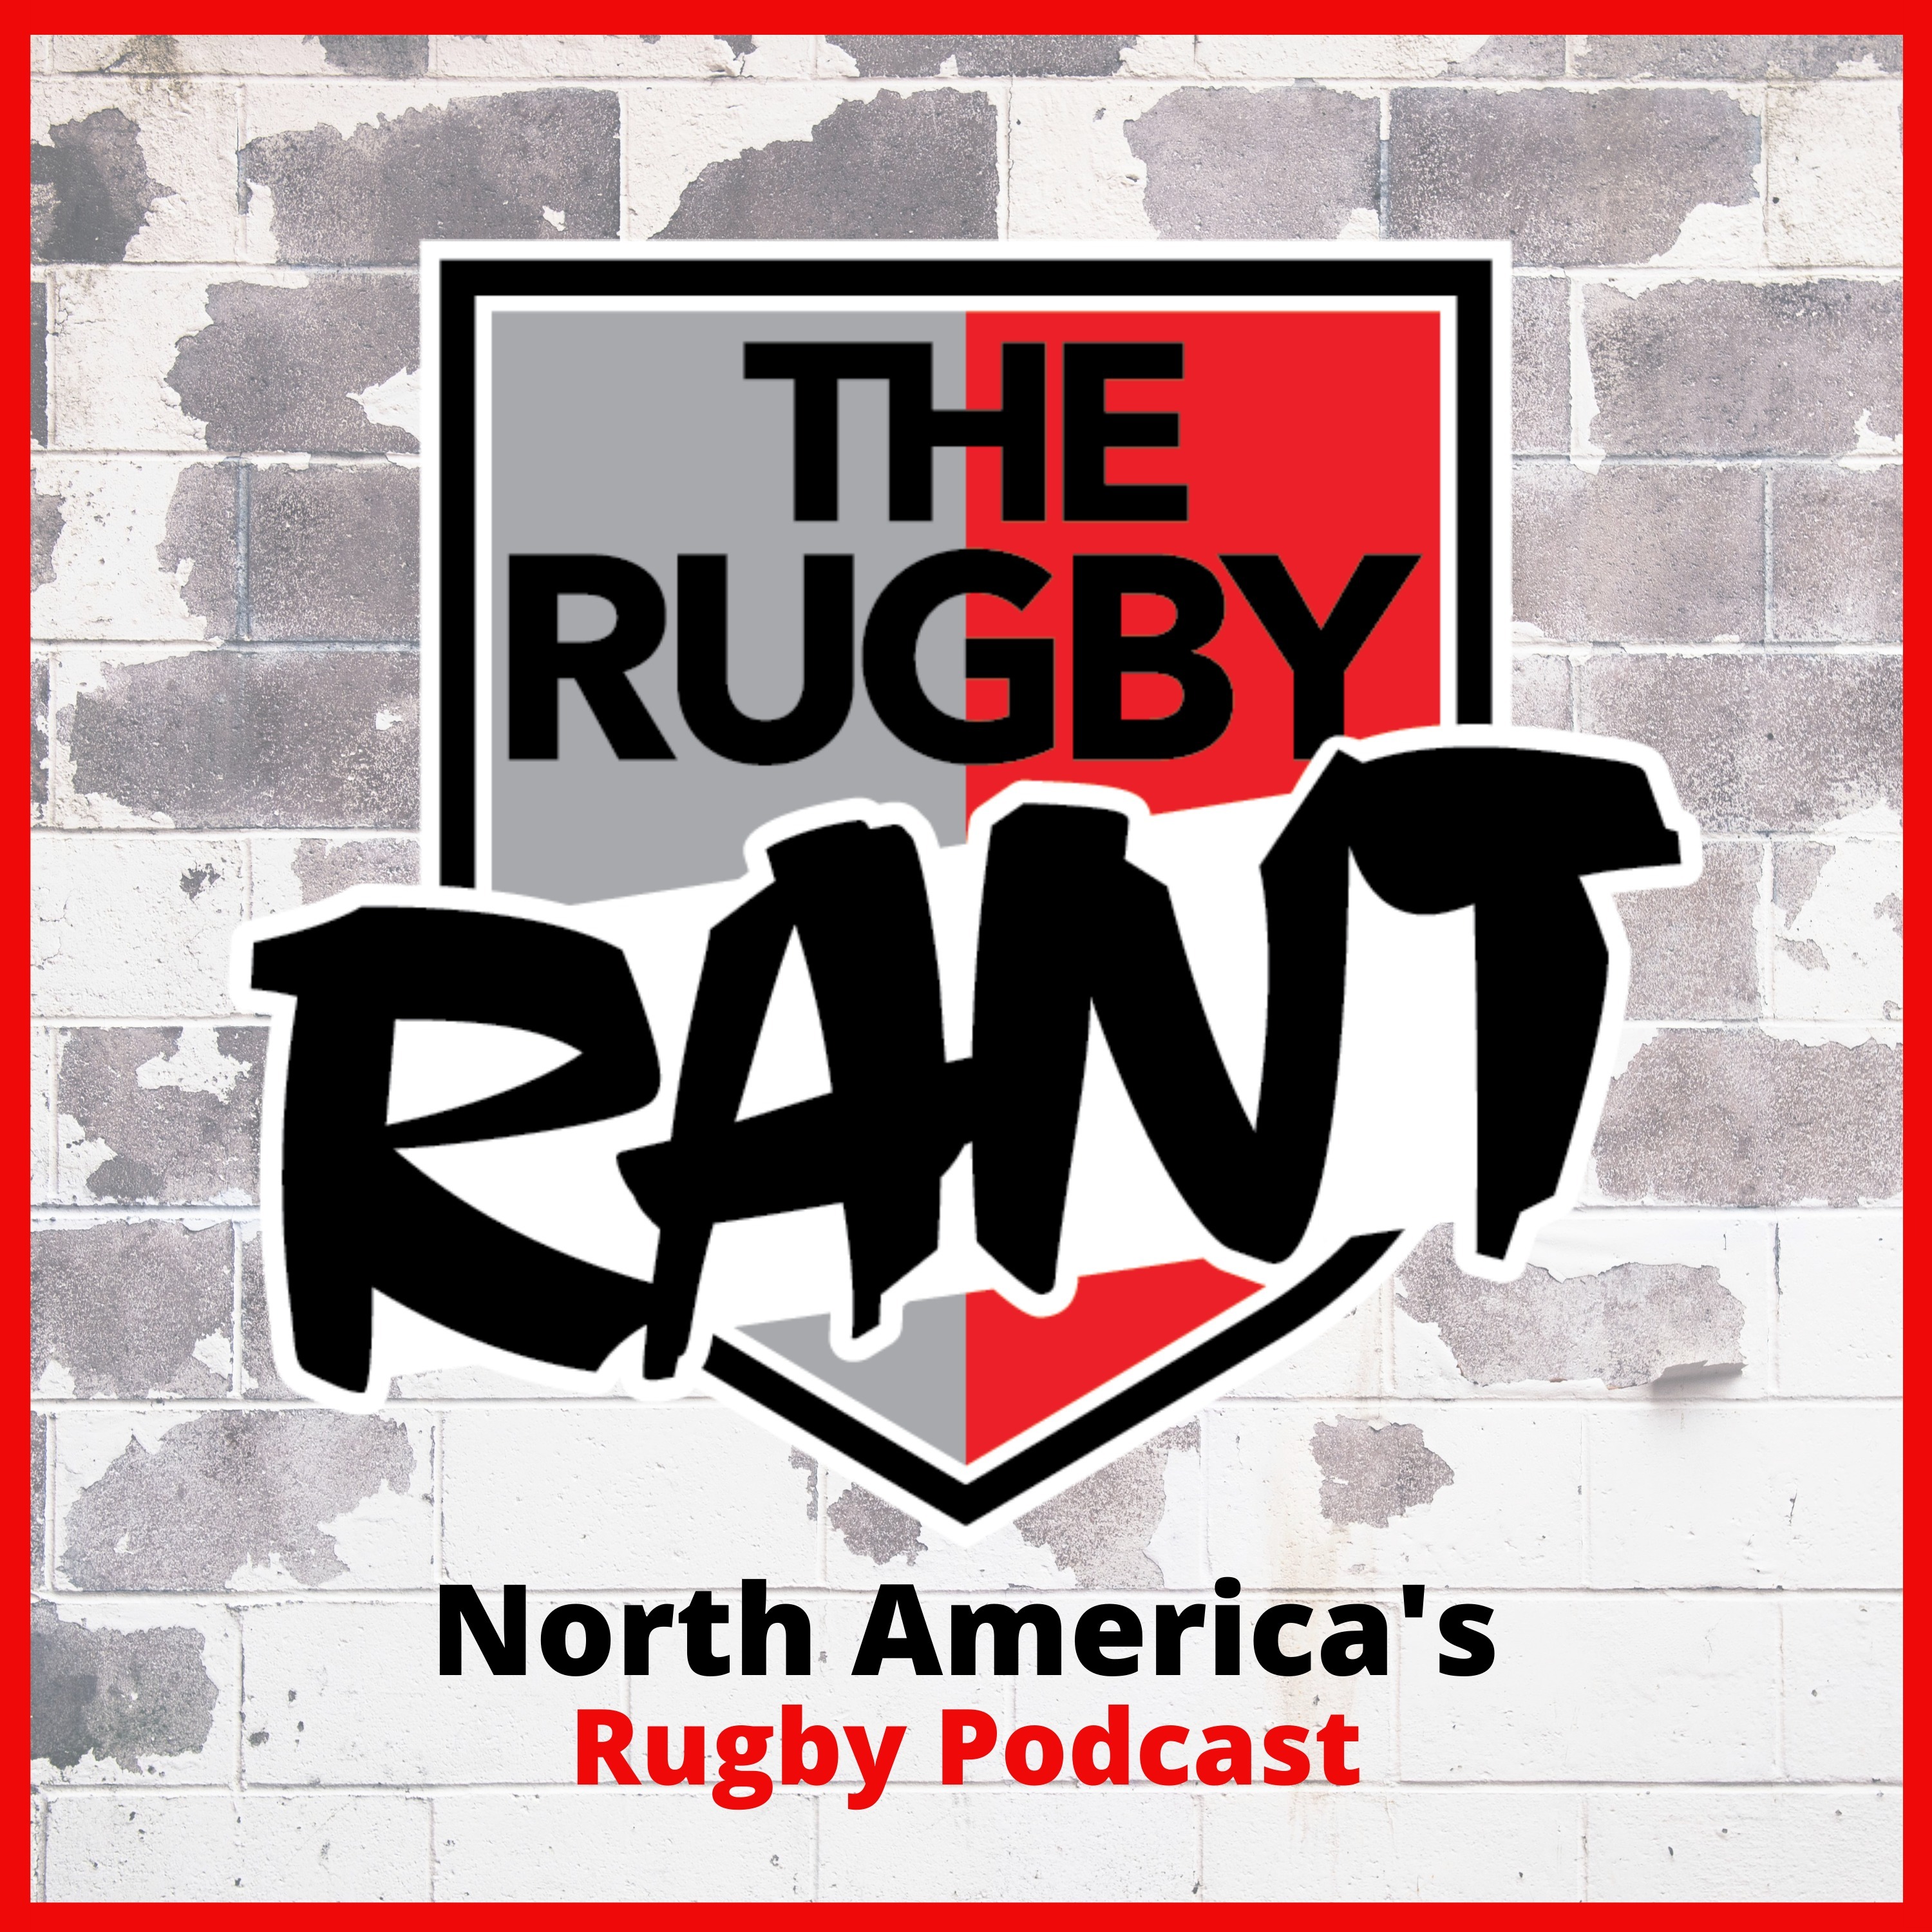 The Rugby Rant - Run, Pass or Kick with Mike Tolkin